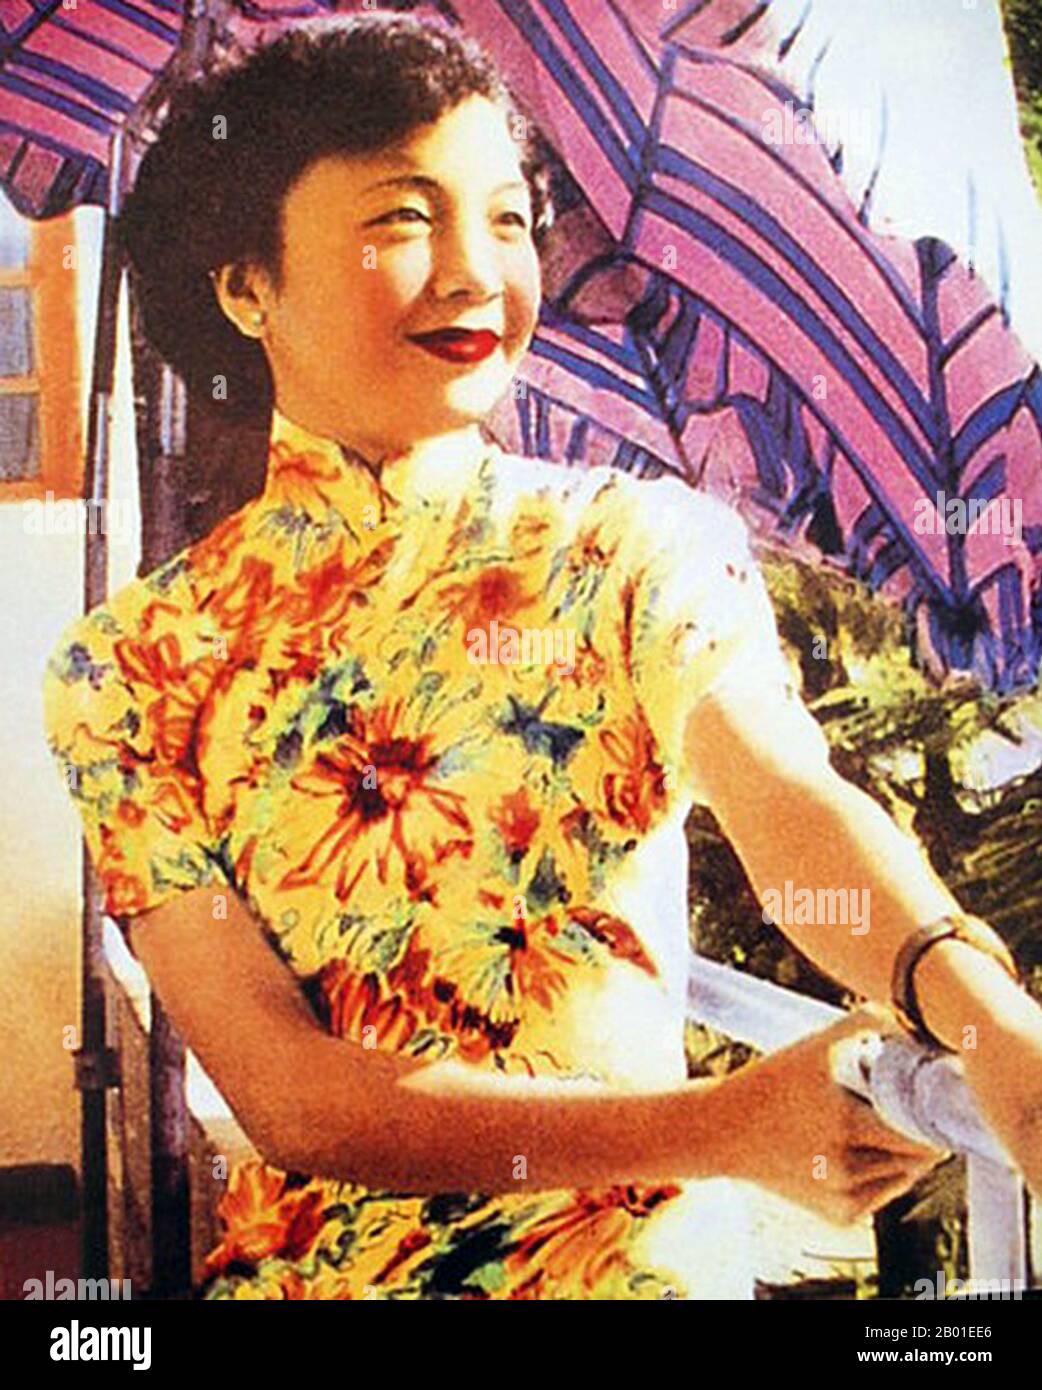 China: Yao Lee (10 September 1922 - 19 July 2019), one of the 'seven great singing stars' in Shanghai during the 1930s and 1940s, 1940s.  Yao Lee (姚莉), also known as Yiu Lei and Miss Hue Lee, was a Chinese singer from the 1930s to the 1970s. By the 1940s, she became one of the seven great singing stars.  Born Yáo Xiùyún/Yiu Sau Wan in Shanghai, Yao began performing with a radio appearance there in 1935 at the age of 13. She was signed to Pathe Records. Yao was known as 'the Silver Voice' (銀嗓子) alluding to fellow Shanghai singer Zhou Xuan, who was known as 'the Golden Voice' (金嗓子). Stock Photo